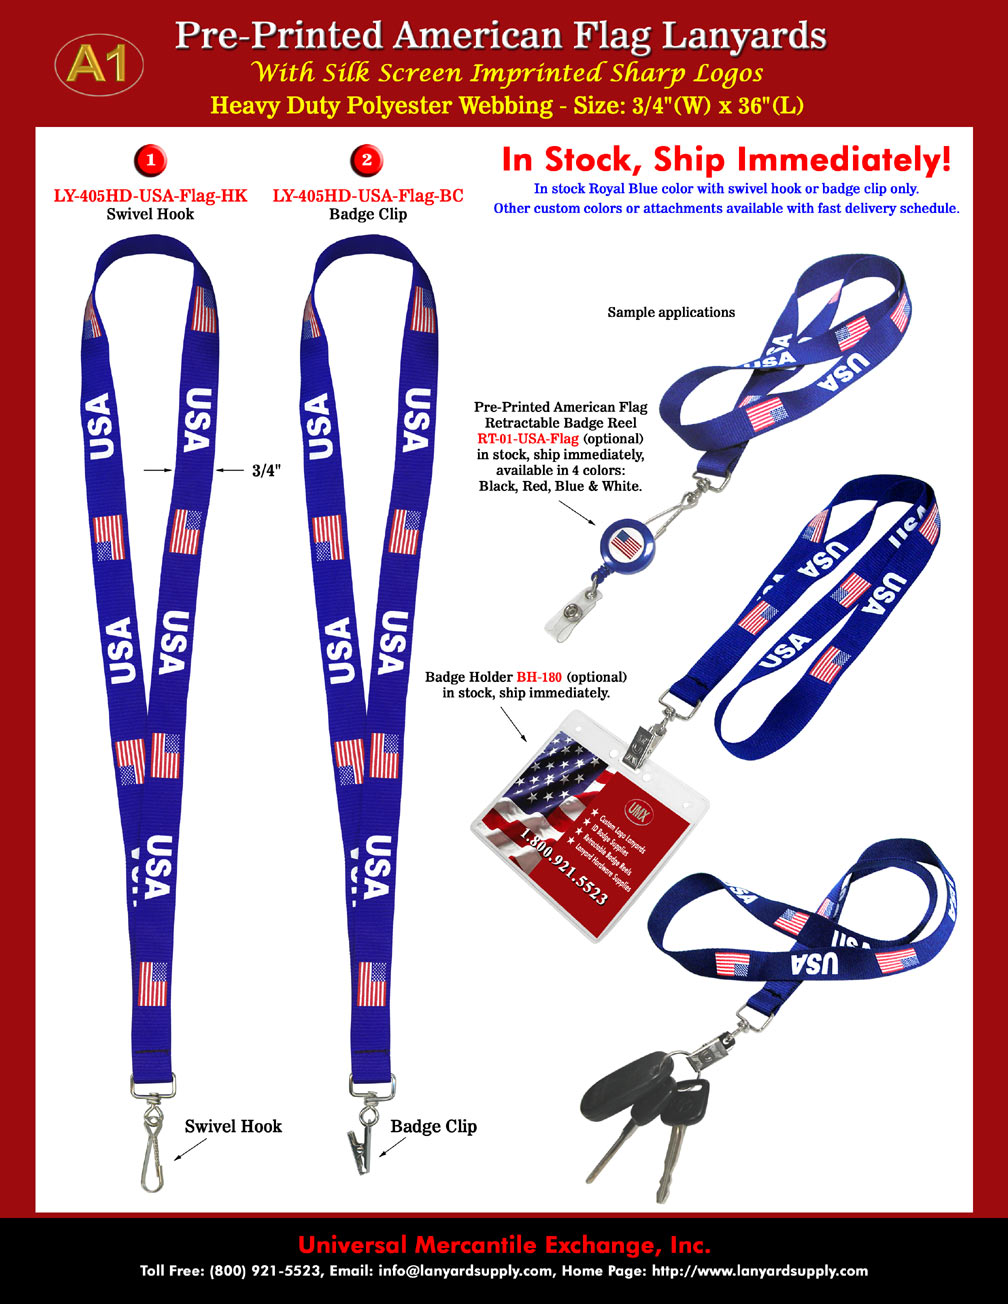 Cool pre-printed lanyards and unique printed badge lanyards are available to ship right away.